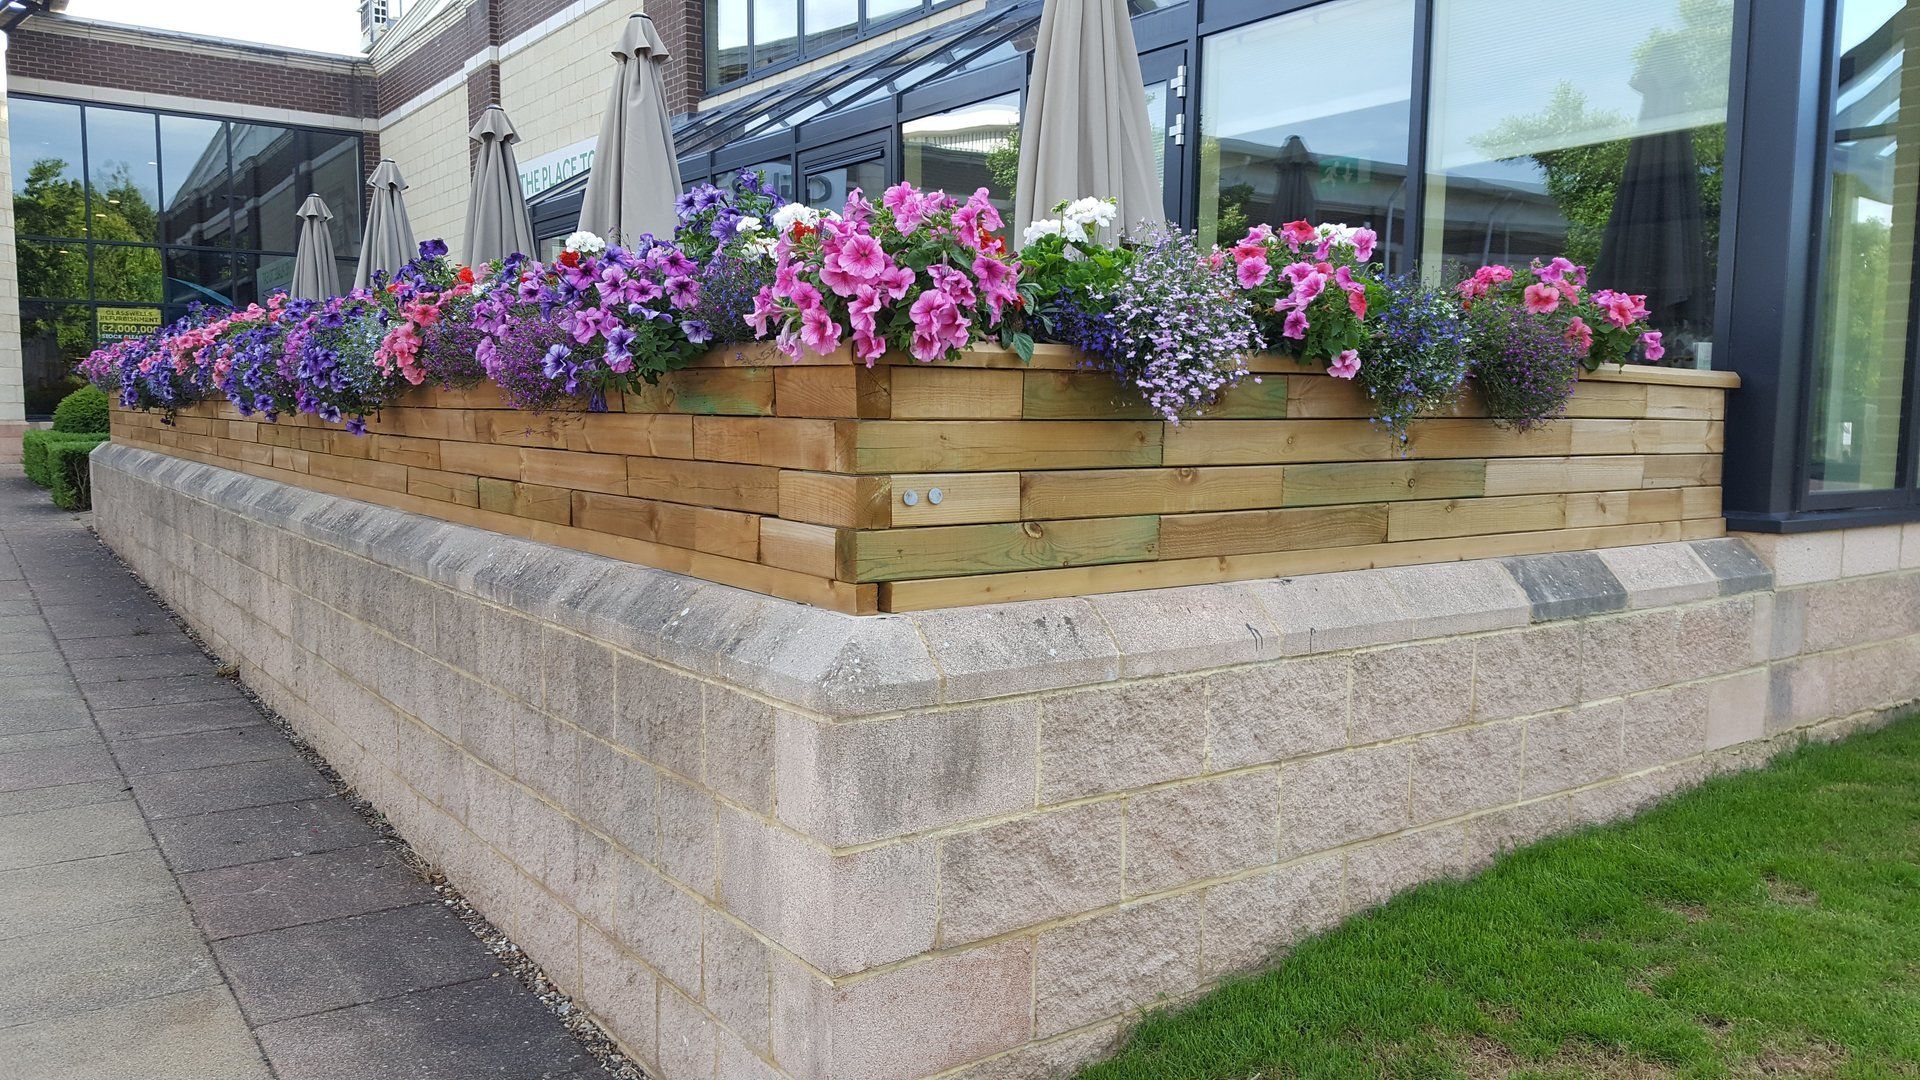 pink/purple/blue flowers in a wooden raised planter